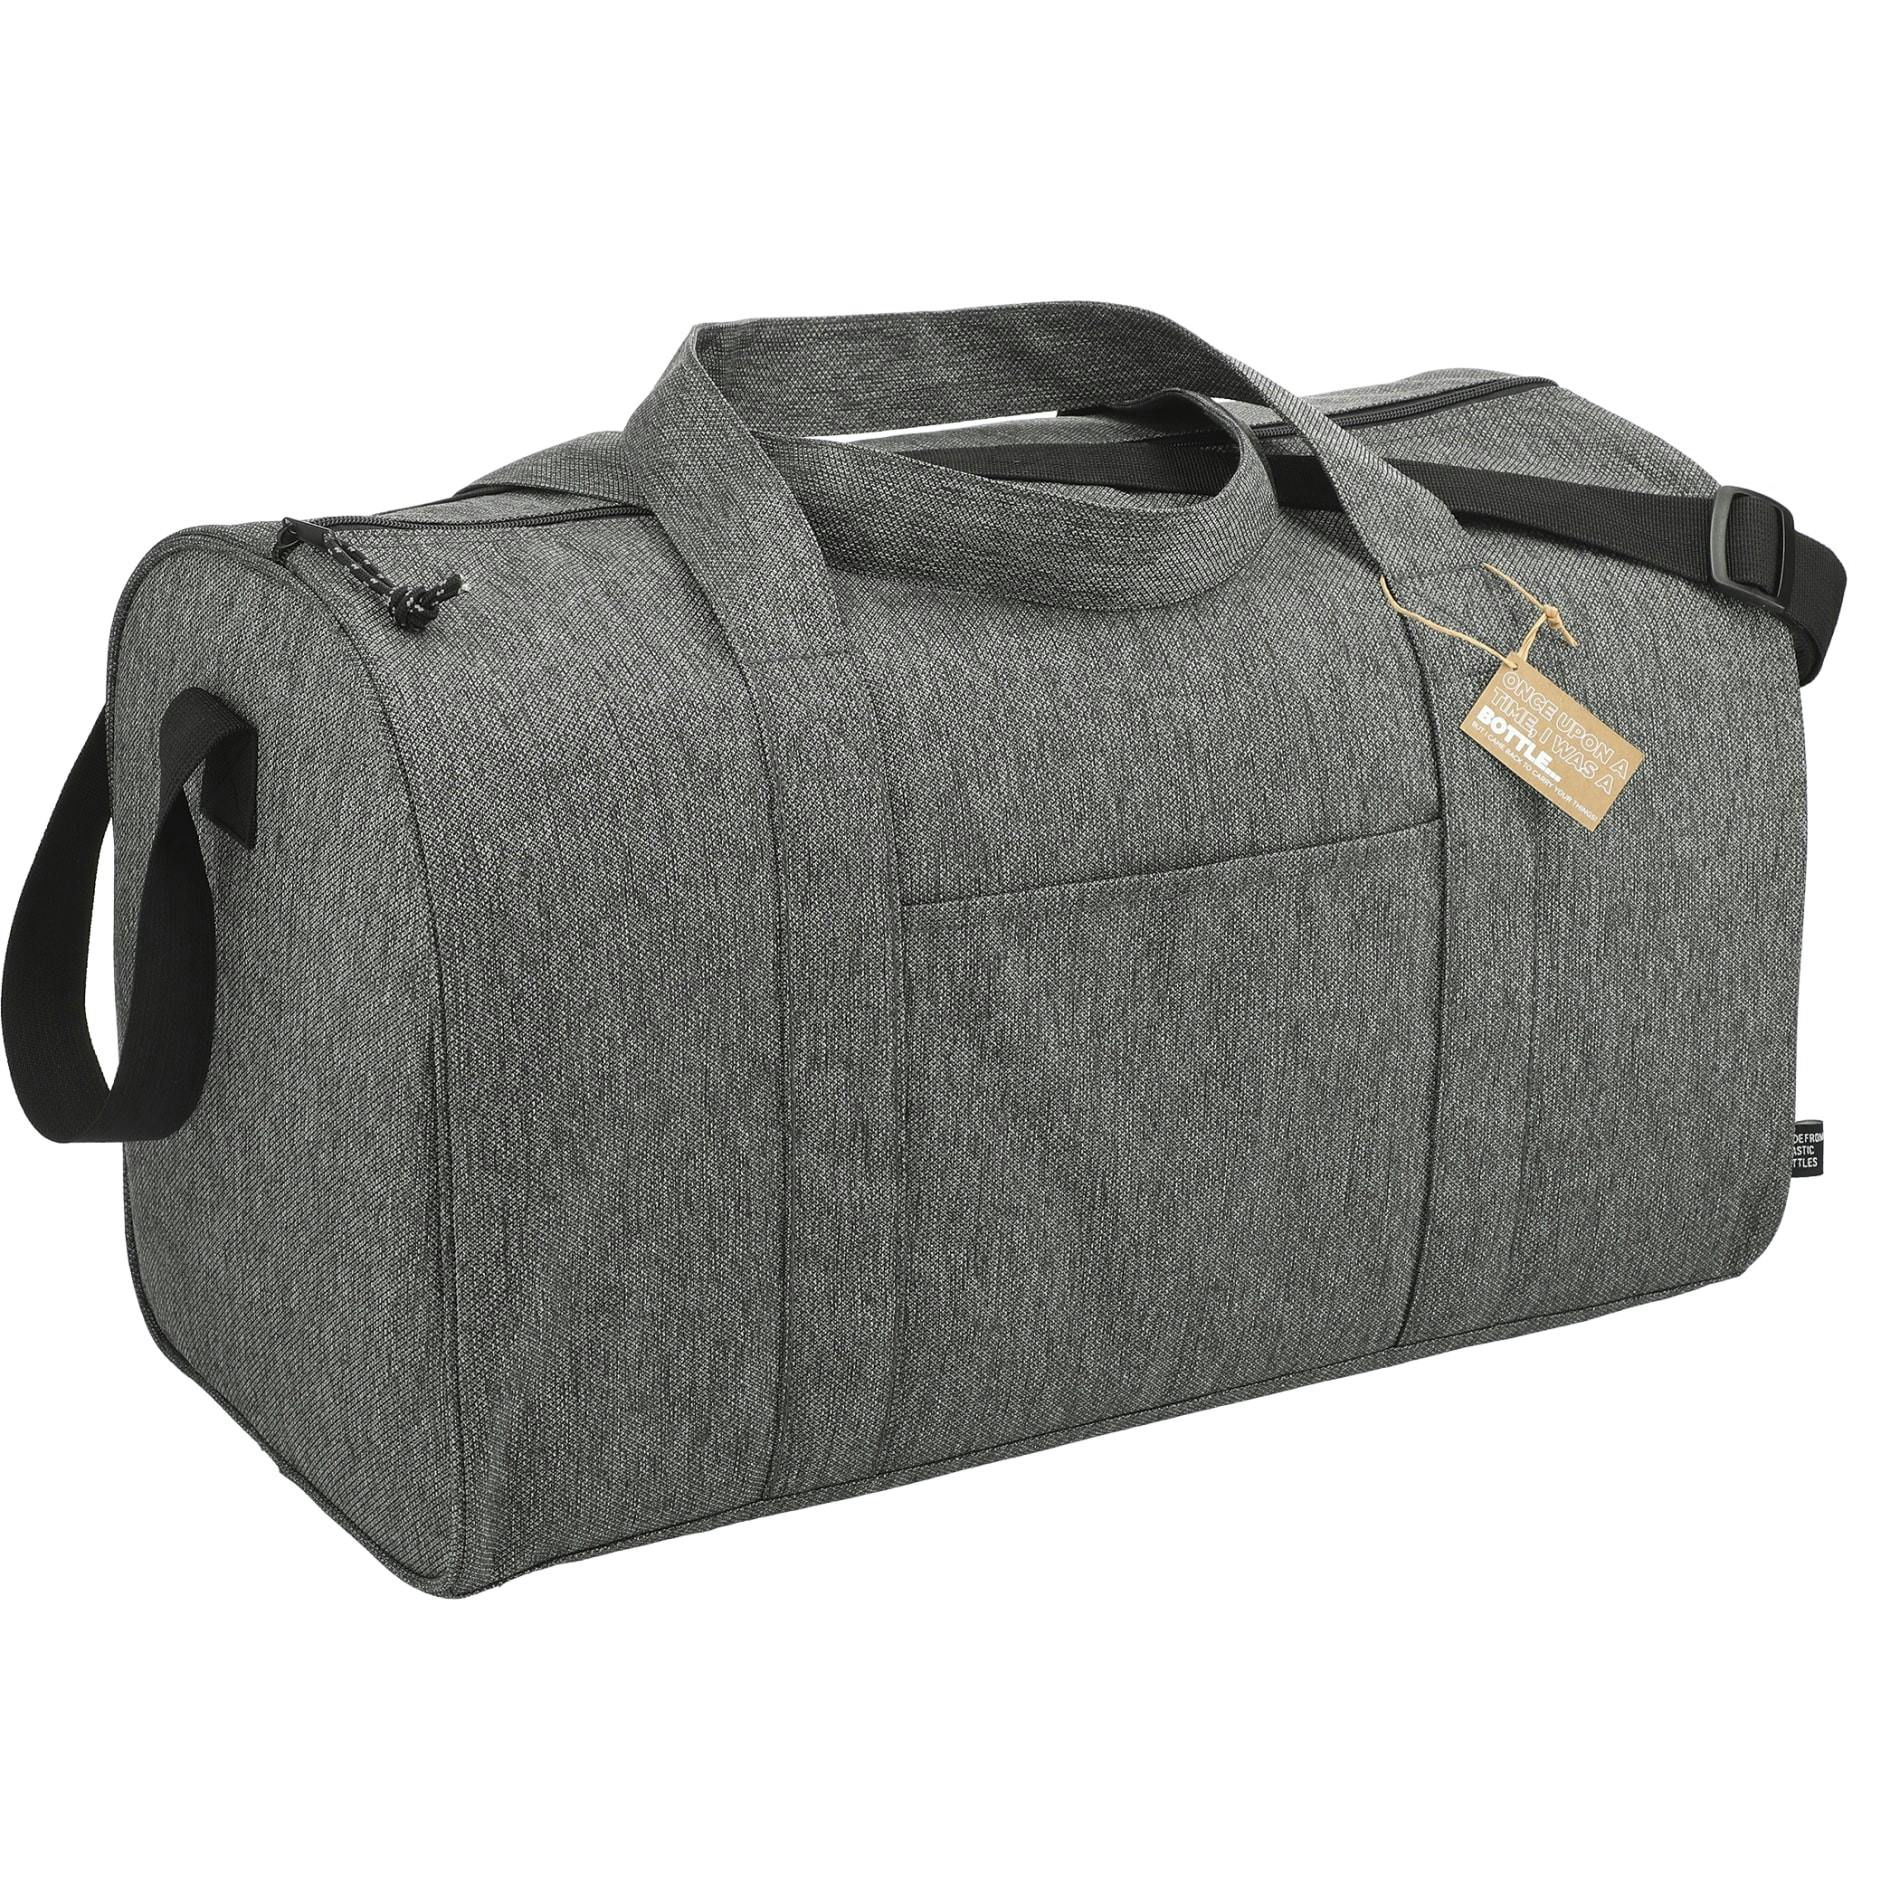 Vila Recycled Executive Duffel - additional Image 3